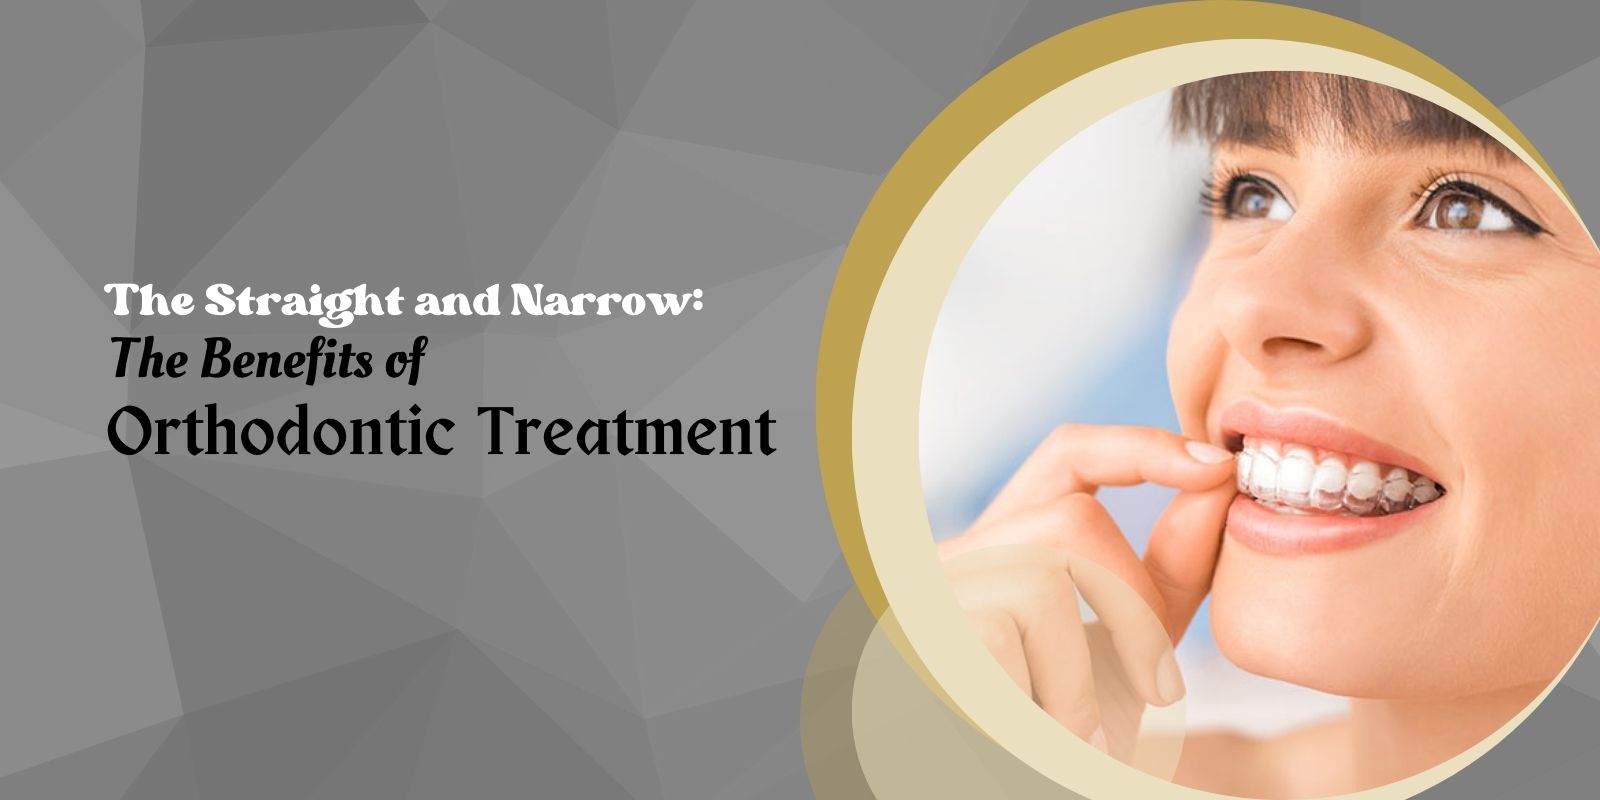 The Straight and Narrow: The Benefits of Orthodontic Treatment